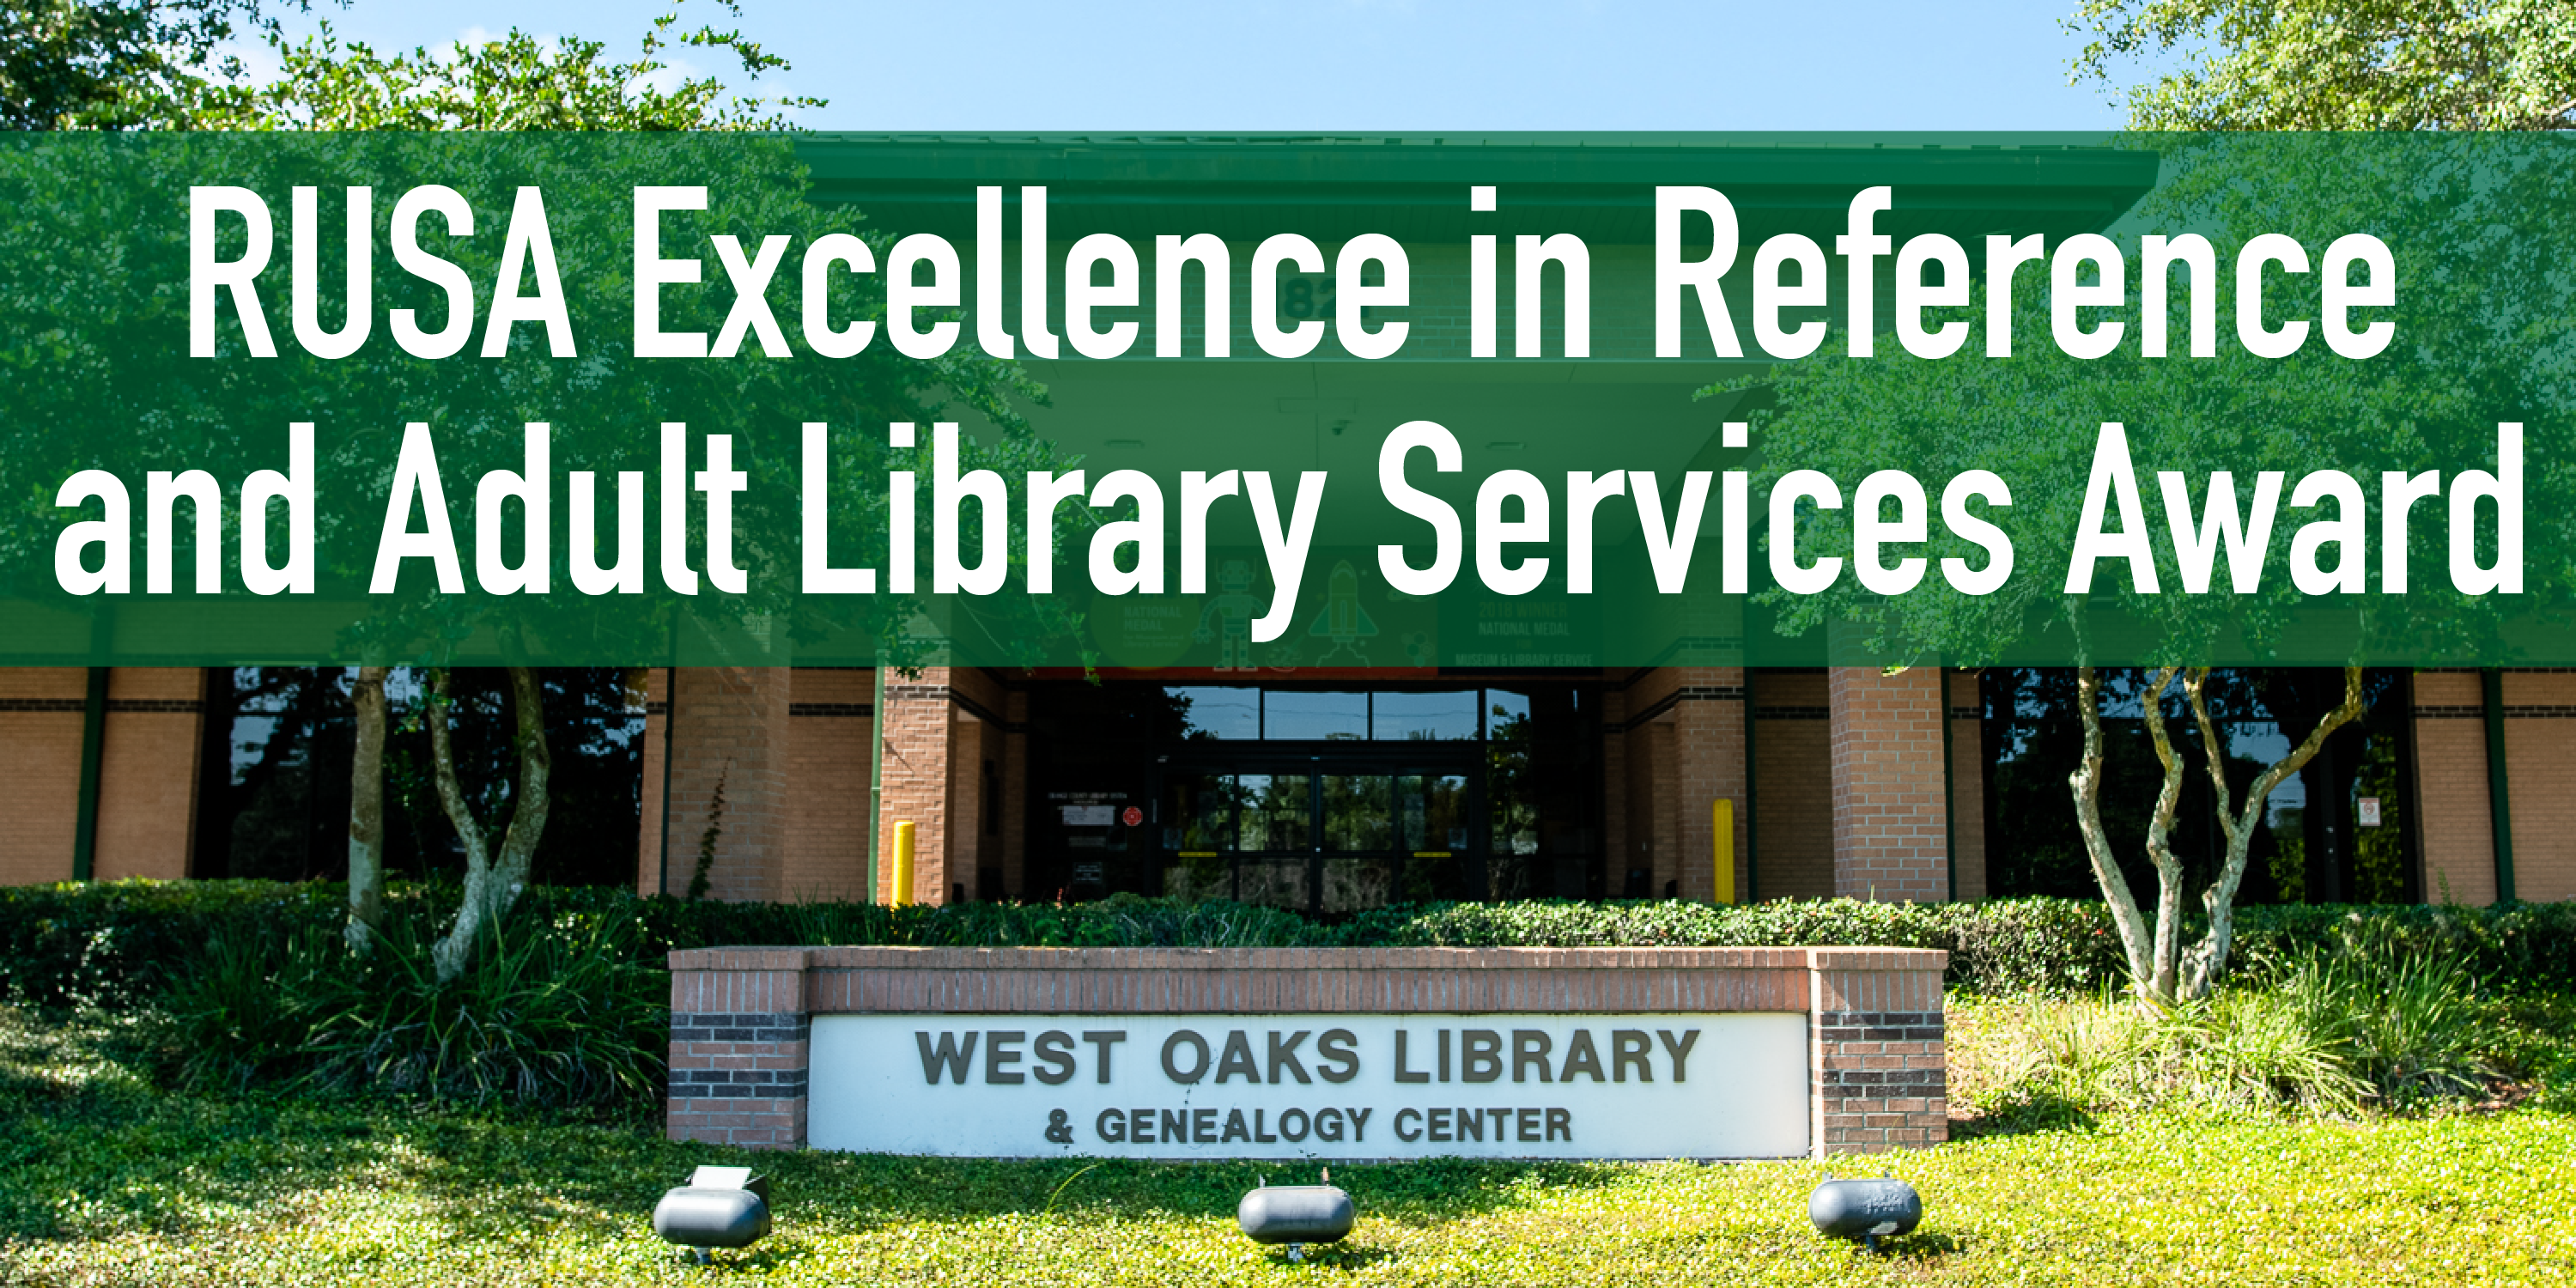 RUSA Excellence in Reference and Adult Library Services Award